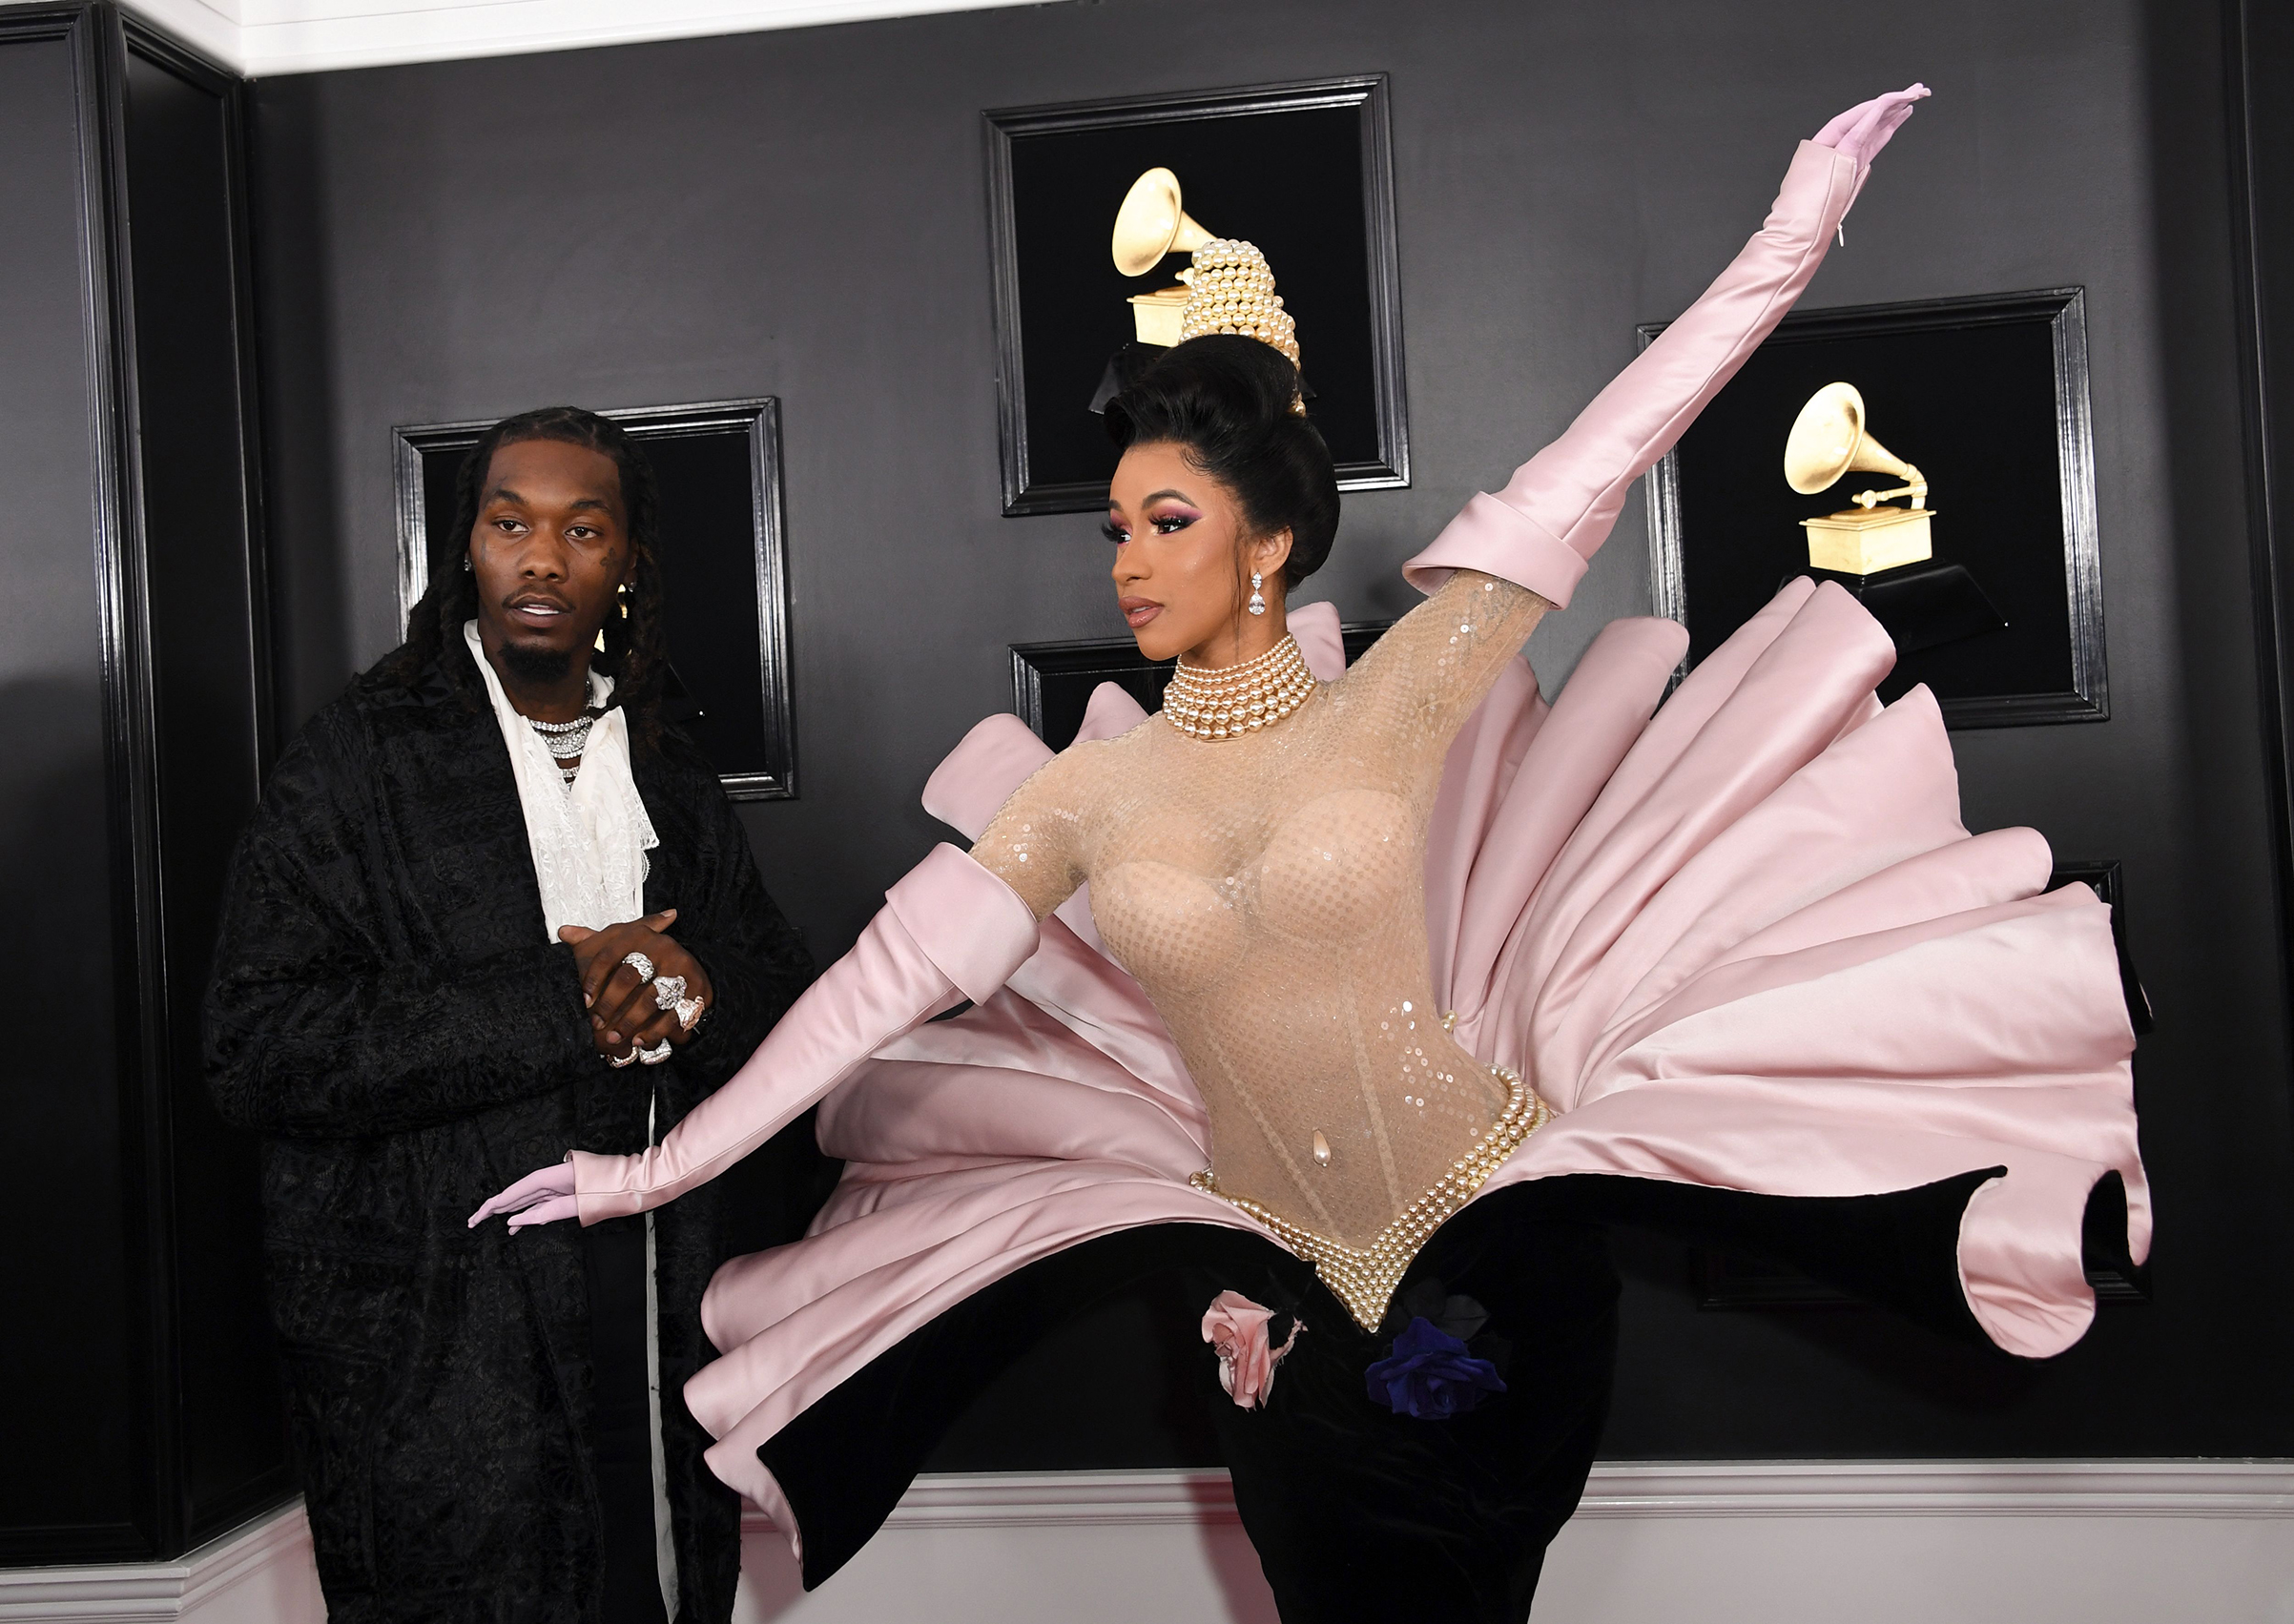 Rapper Cardi B and arrives for the 61st Annual Grammy Awards. (Valerie Macon&mdash;AFP/Getty Images)